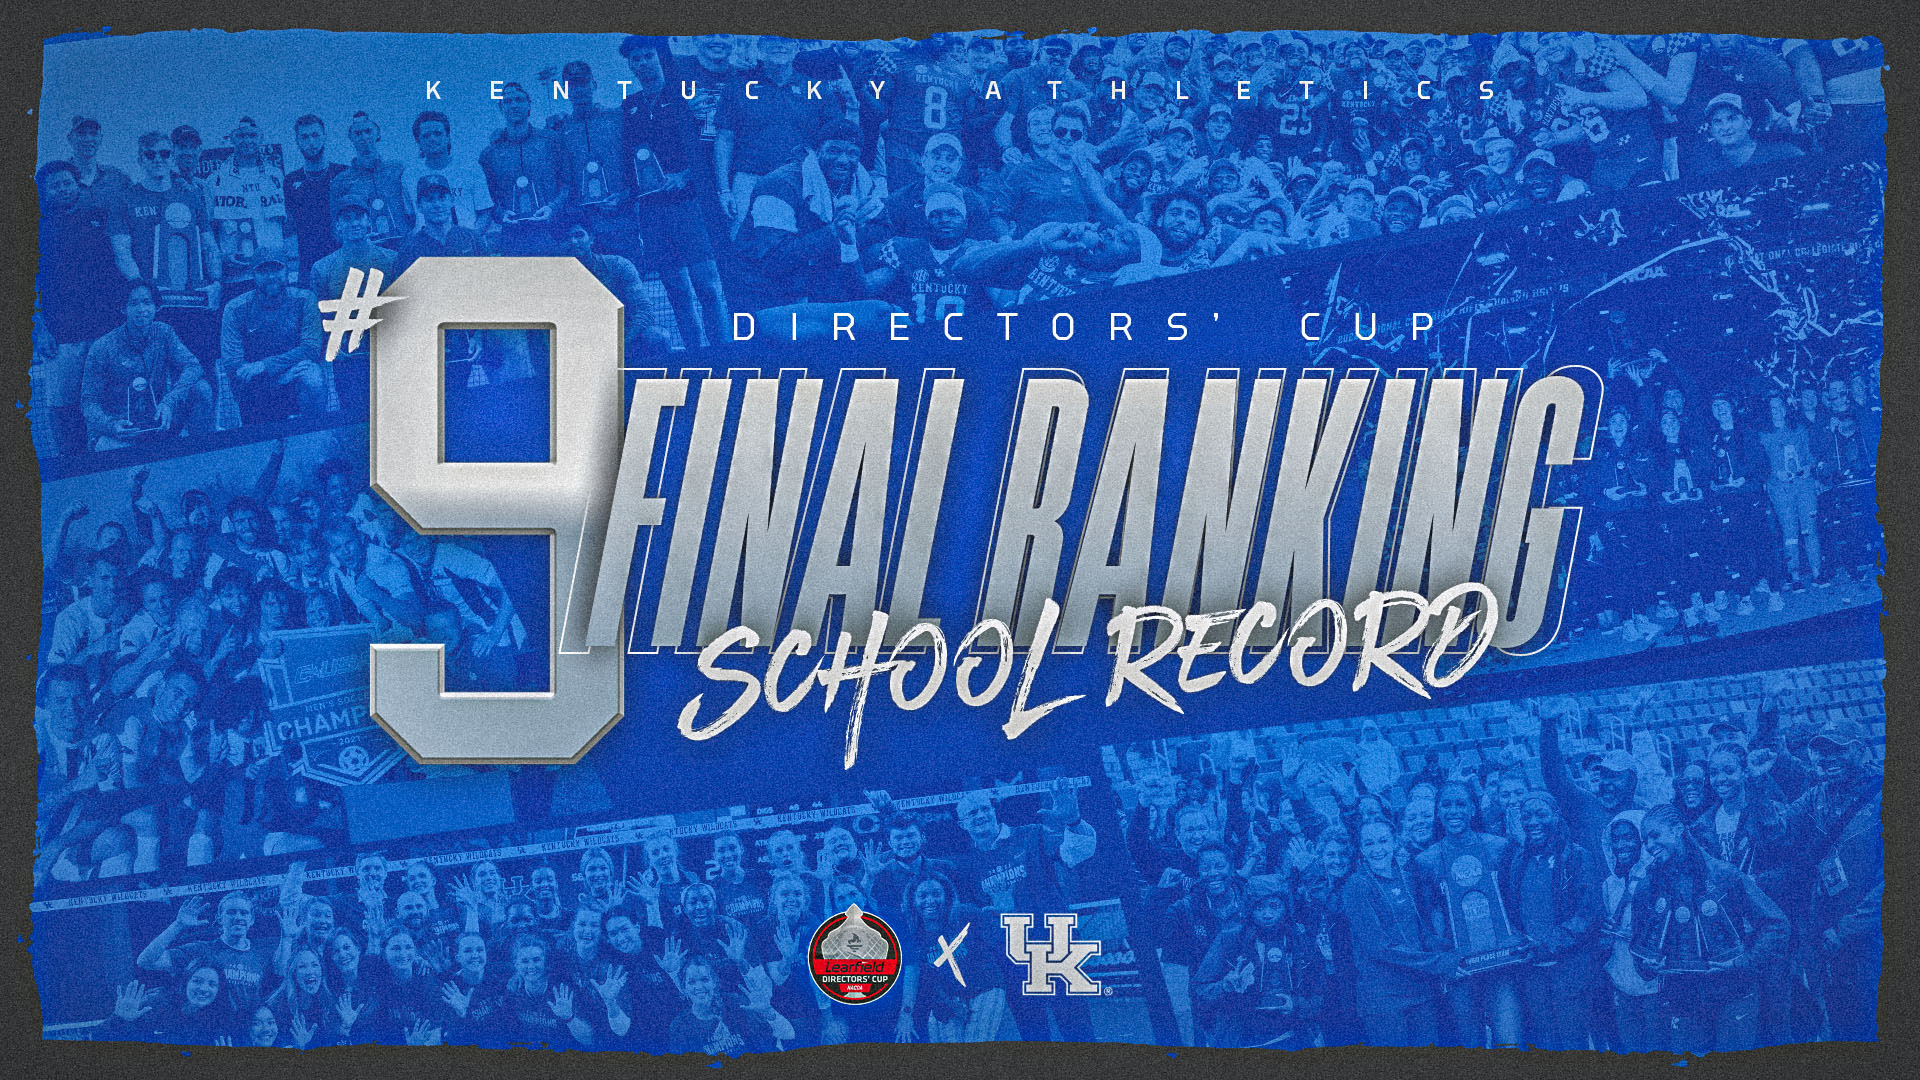 Kentucky Has School-Record Ninth-Place Finish in Final Directors’ Cup Standings